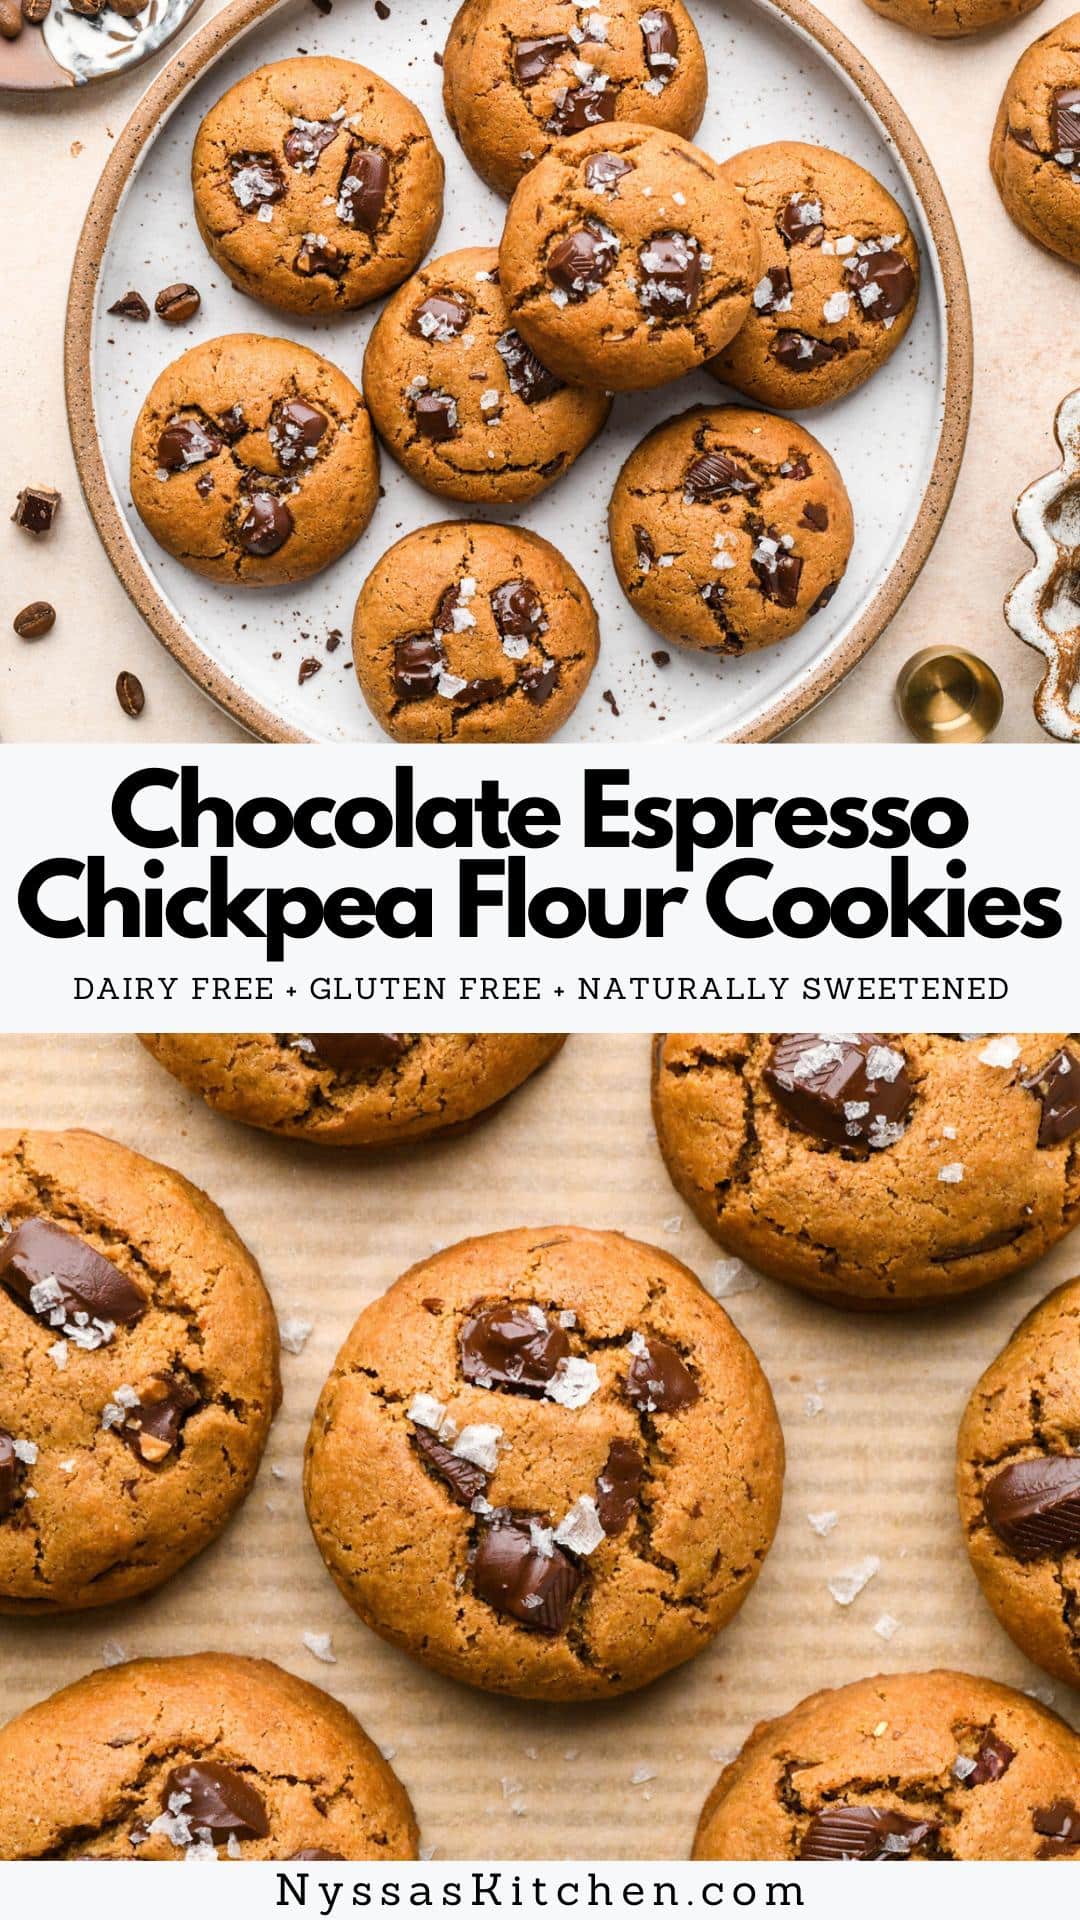 These dark chocolate espresso chickpea flour cookies are easy to make and the perfect tasty bite to satisfy your sweet tooth. A treat you'll feel good about sharing with the people you love! They're made with chickpea flour, coconut sugar, coconut oil (or ghee), one egg, vanilla, espresso powder, and of course - dark chocolate. They're perfectly soft yet still lightly chewy, with little pockets of chocolate and flaky salt to tie all of the decadent flavors together. Makes 12-16 cookies.